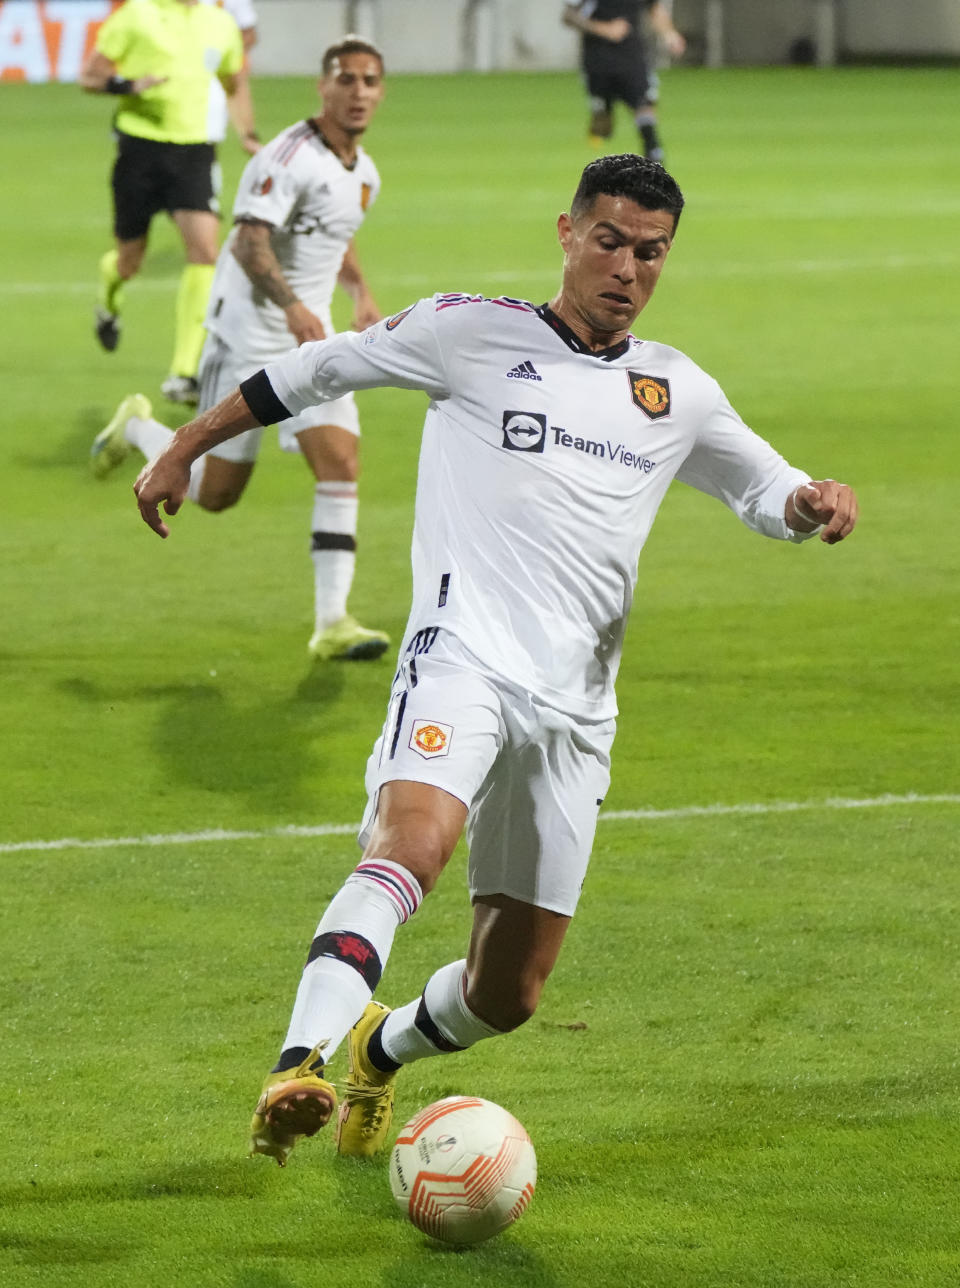 Manchester United's Cristiano Ronaldo controls the ball during the Europa League, group E soccer match between Sheriff Tiraspol and Manchester United at the Zimbru stadium, in Chisinau, Moldova, Thursday, Sept. 15, 2022. (AP Photo/Sergei Grits)